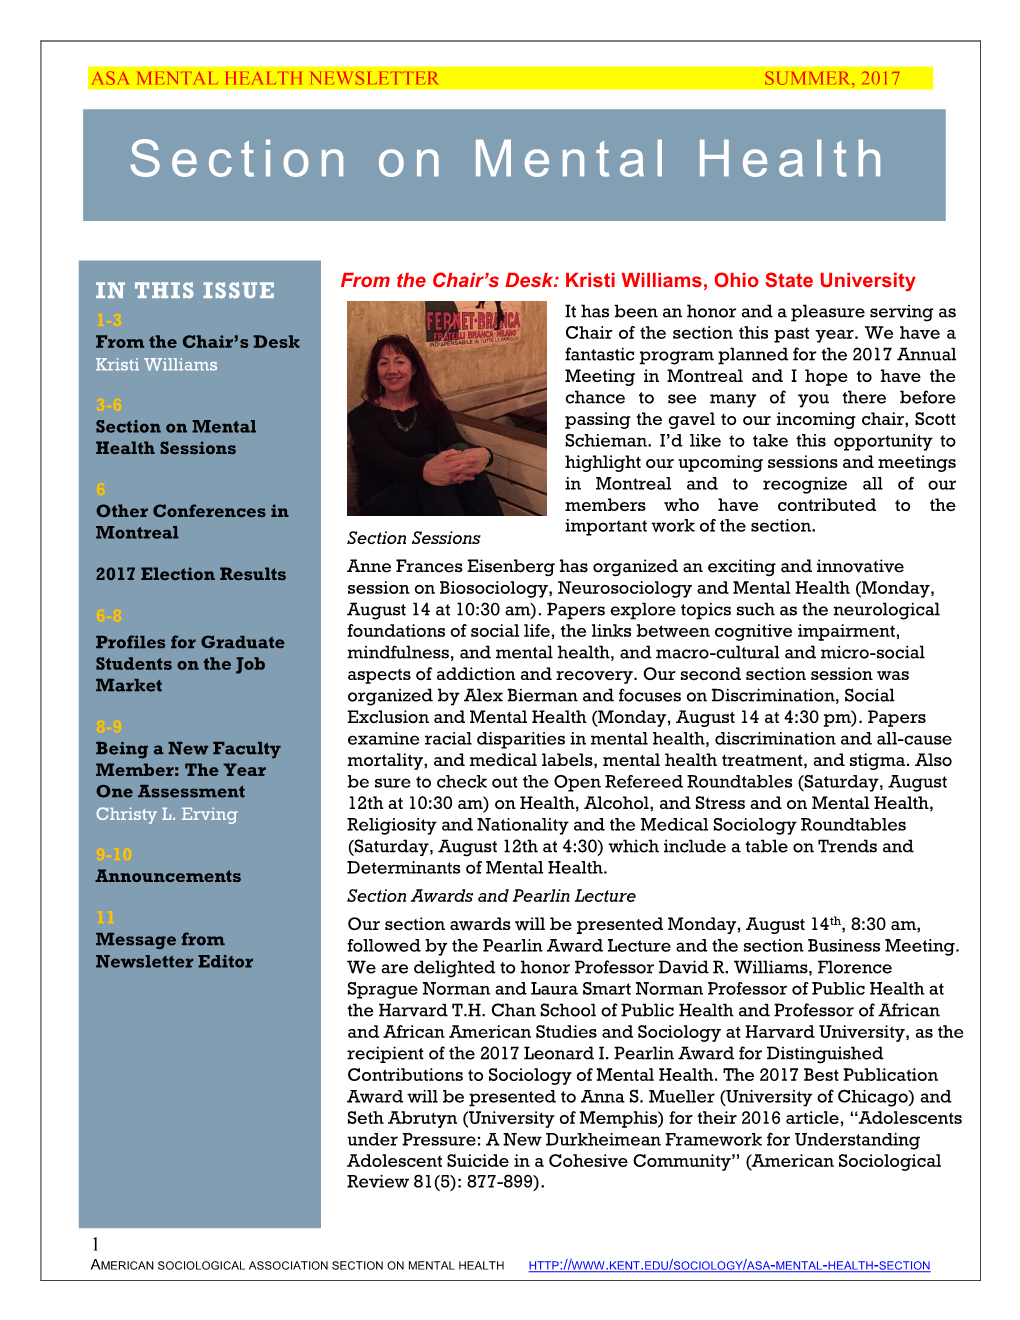 Section on Mental Health